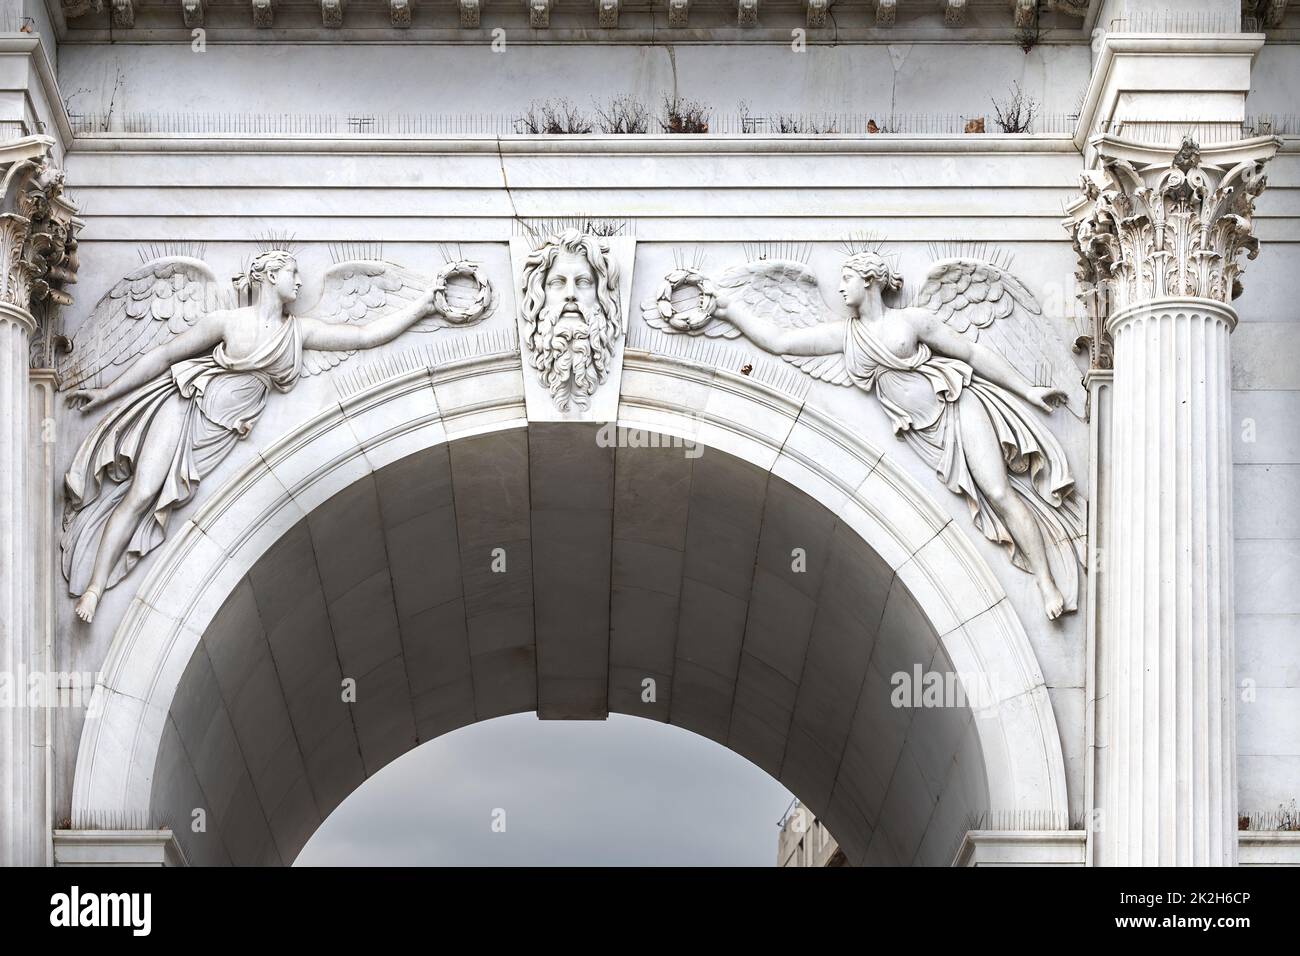 Detail of sculpture on the Marble Arch, at the junction of Park Lane and Oxford Street, London, England. Stock Photo